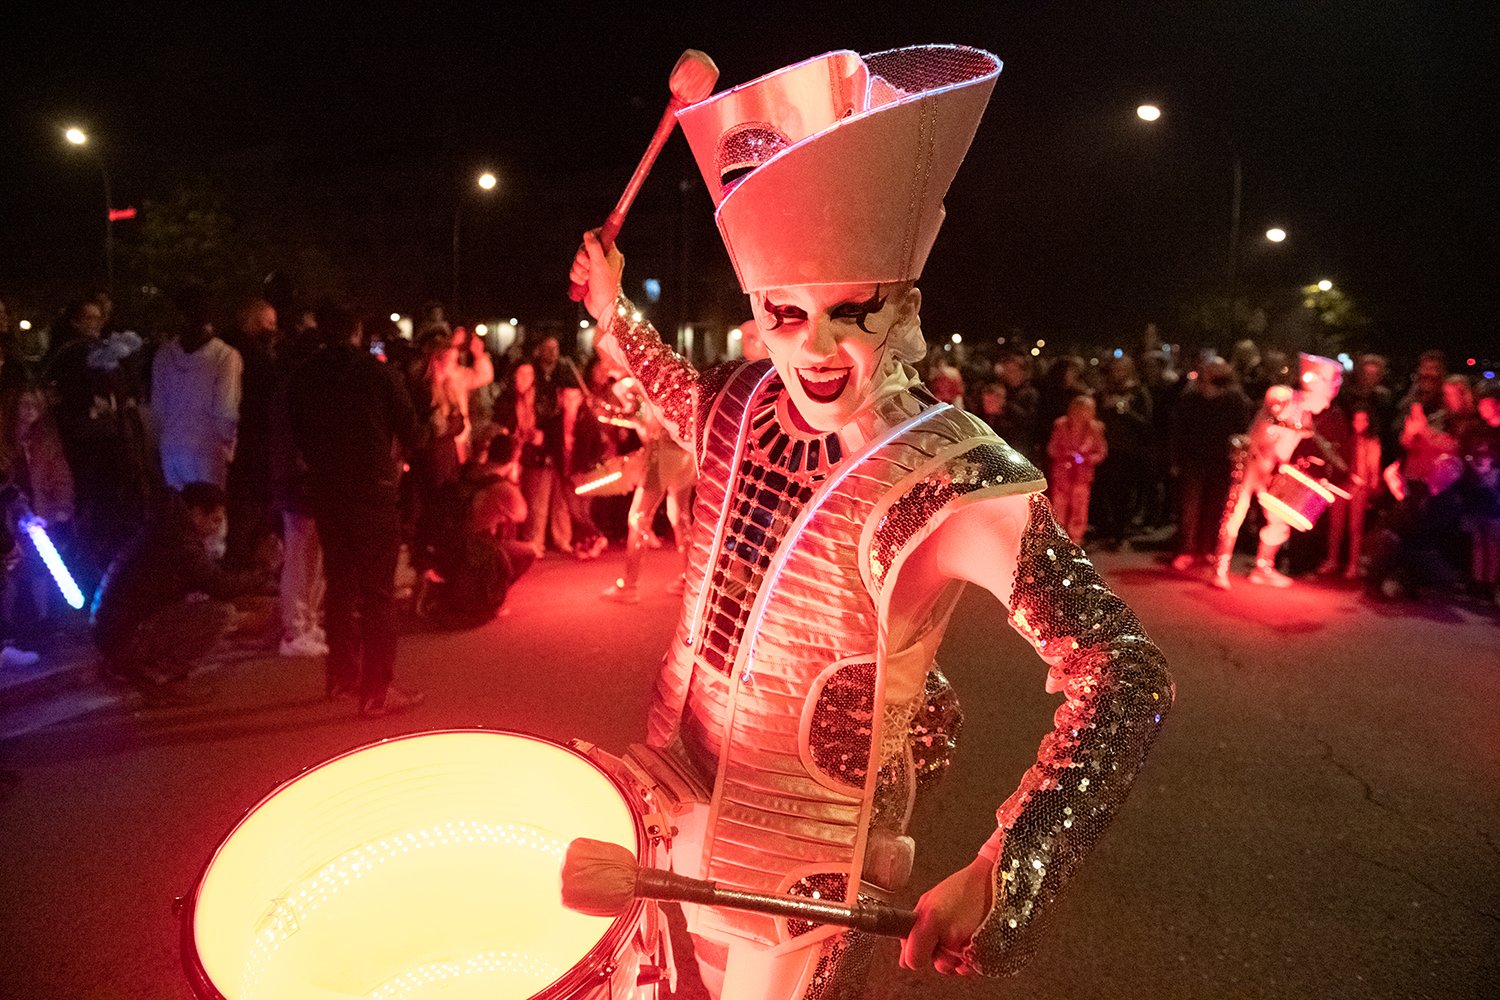 City of Light festival astounds Milton Keynes residents and visitors